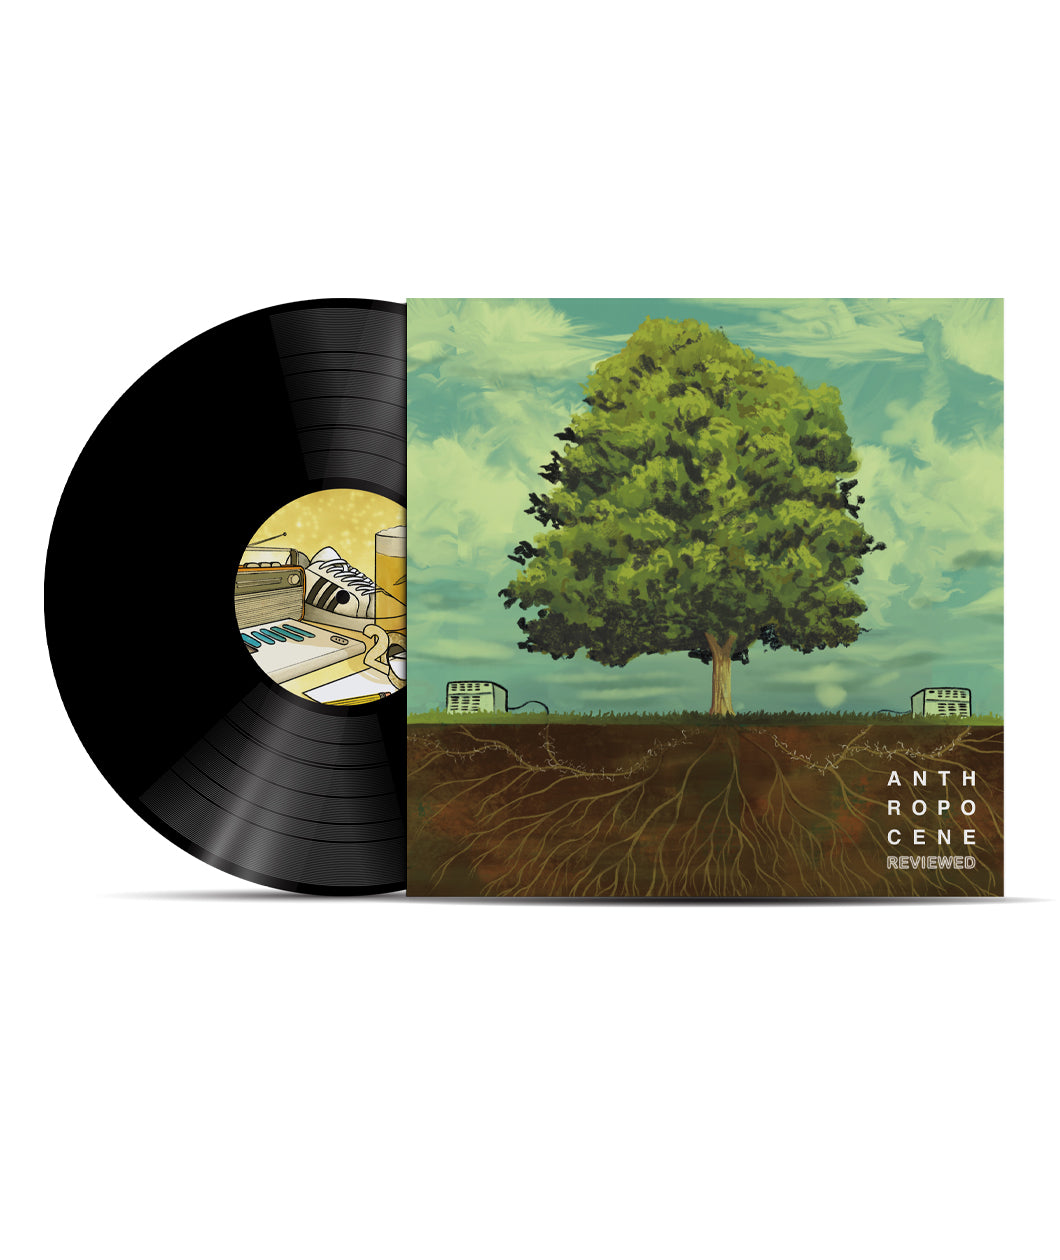 A black record with a still life water color drawing of a show, radio, and cup are in the center. Record is coming out of a sleeve. The record sleeve is a painting of a tree, showing underground roots, against a cloudy sky. “Anthropocene Reviewed” is on the bottom right in white sans serif font - from The Anthropocene Reviewed